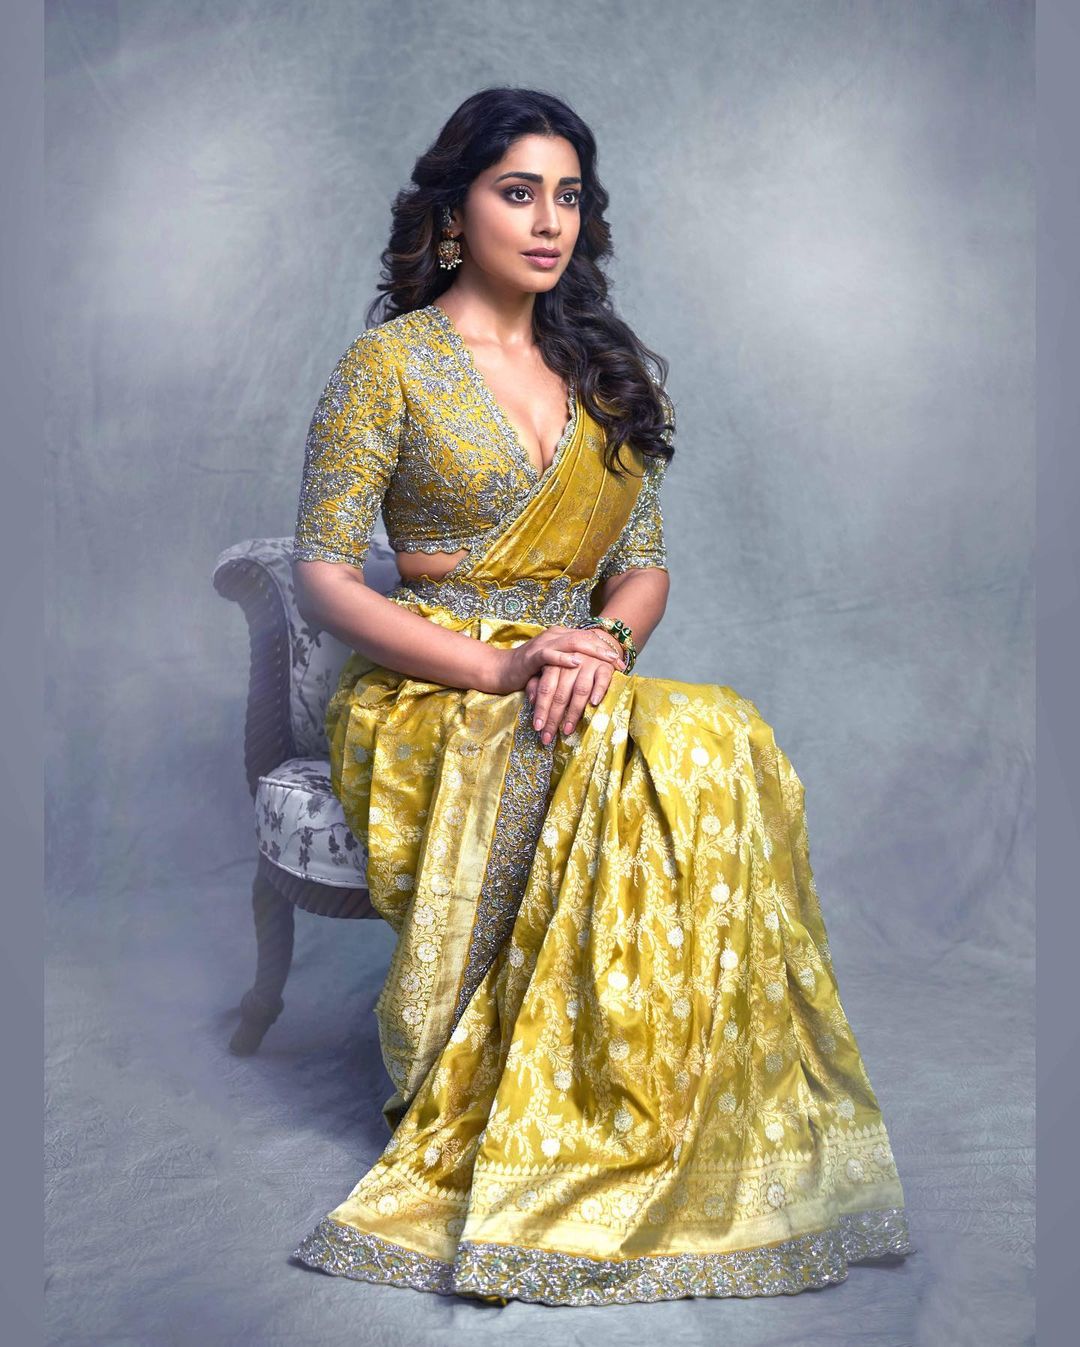 Shriya Saran Ups Glamour Quotient In Sparkly Sequin Saree, Check Out The  Diva's Most Stunning Looks In Gorgeous Sarees - News18